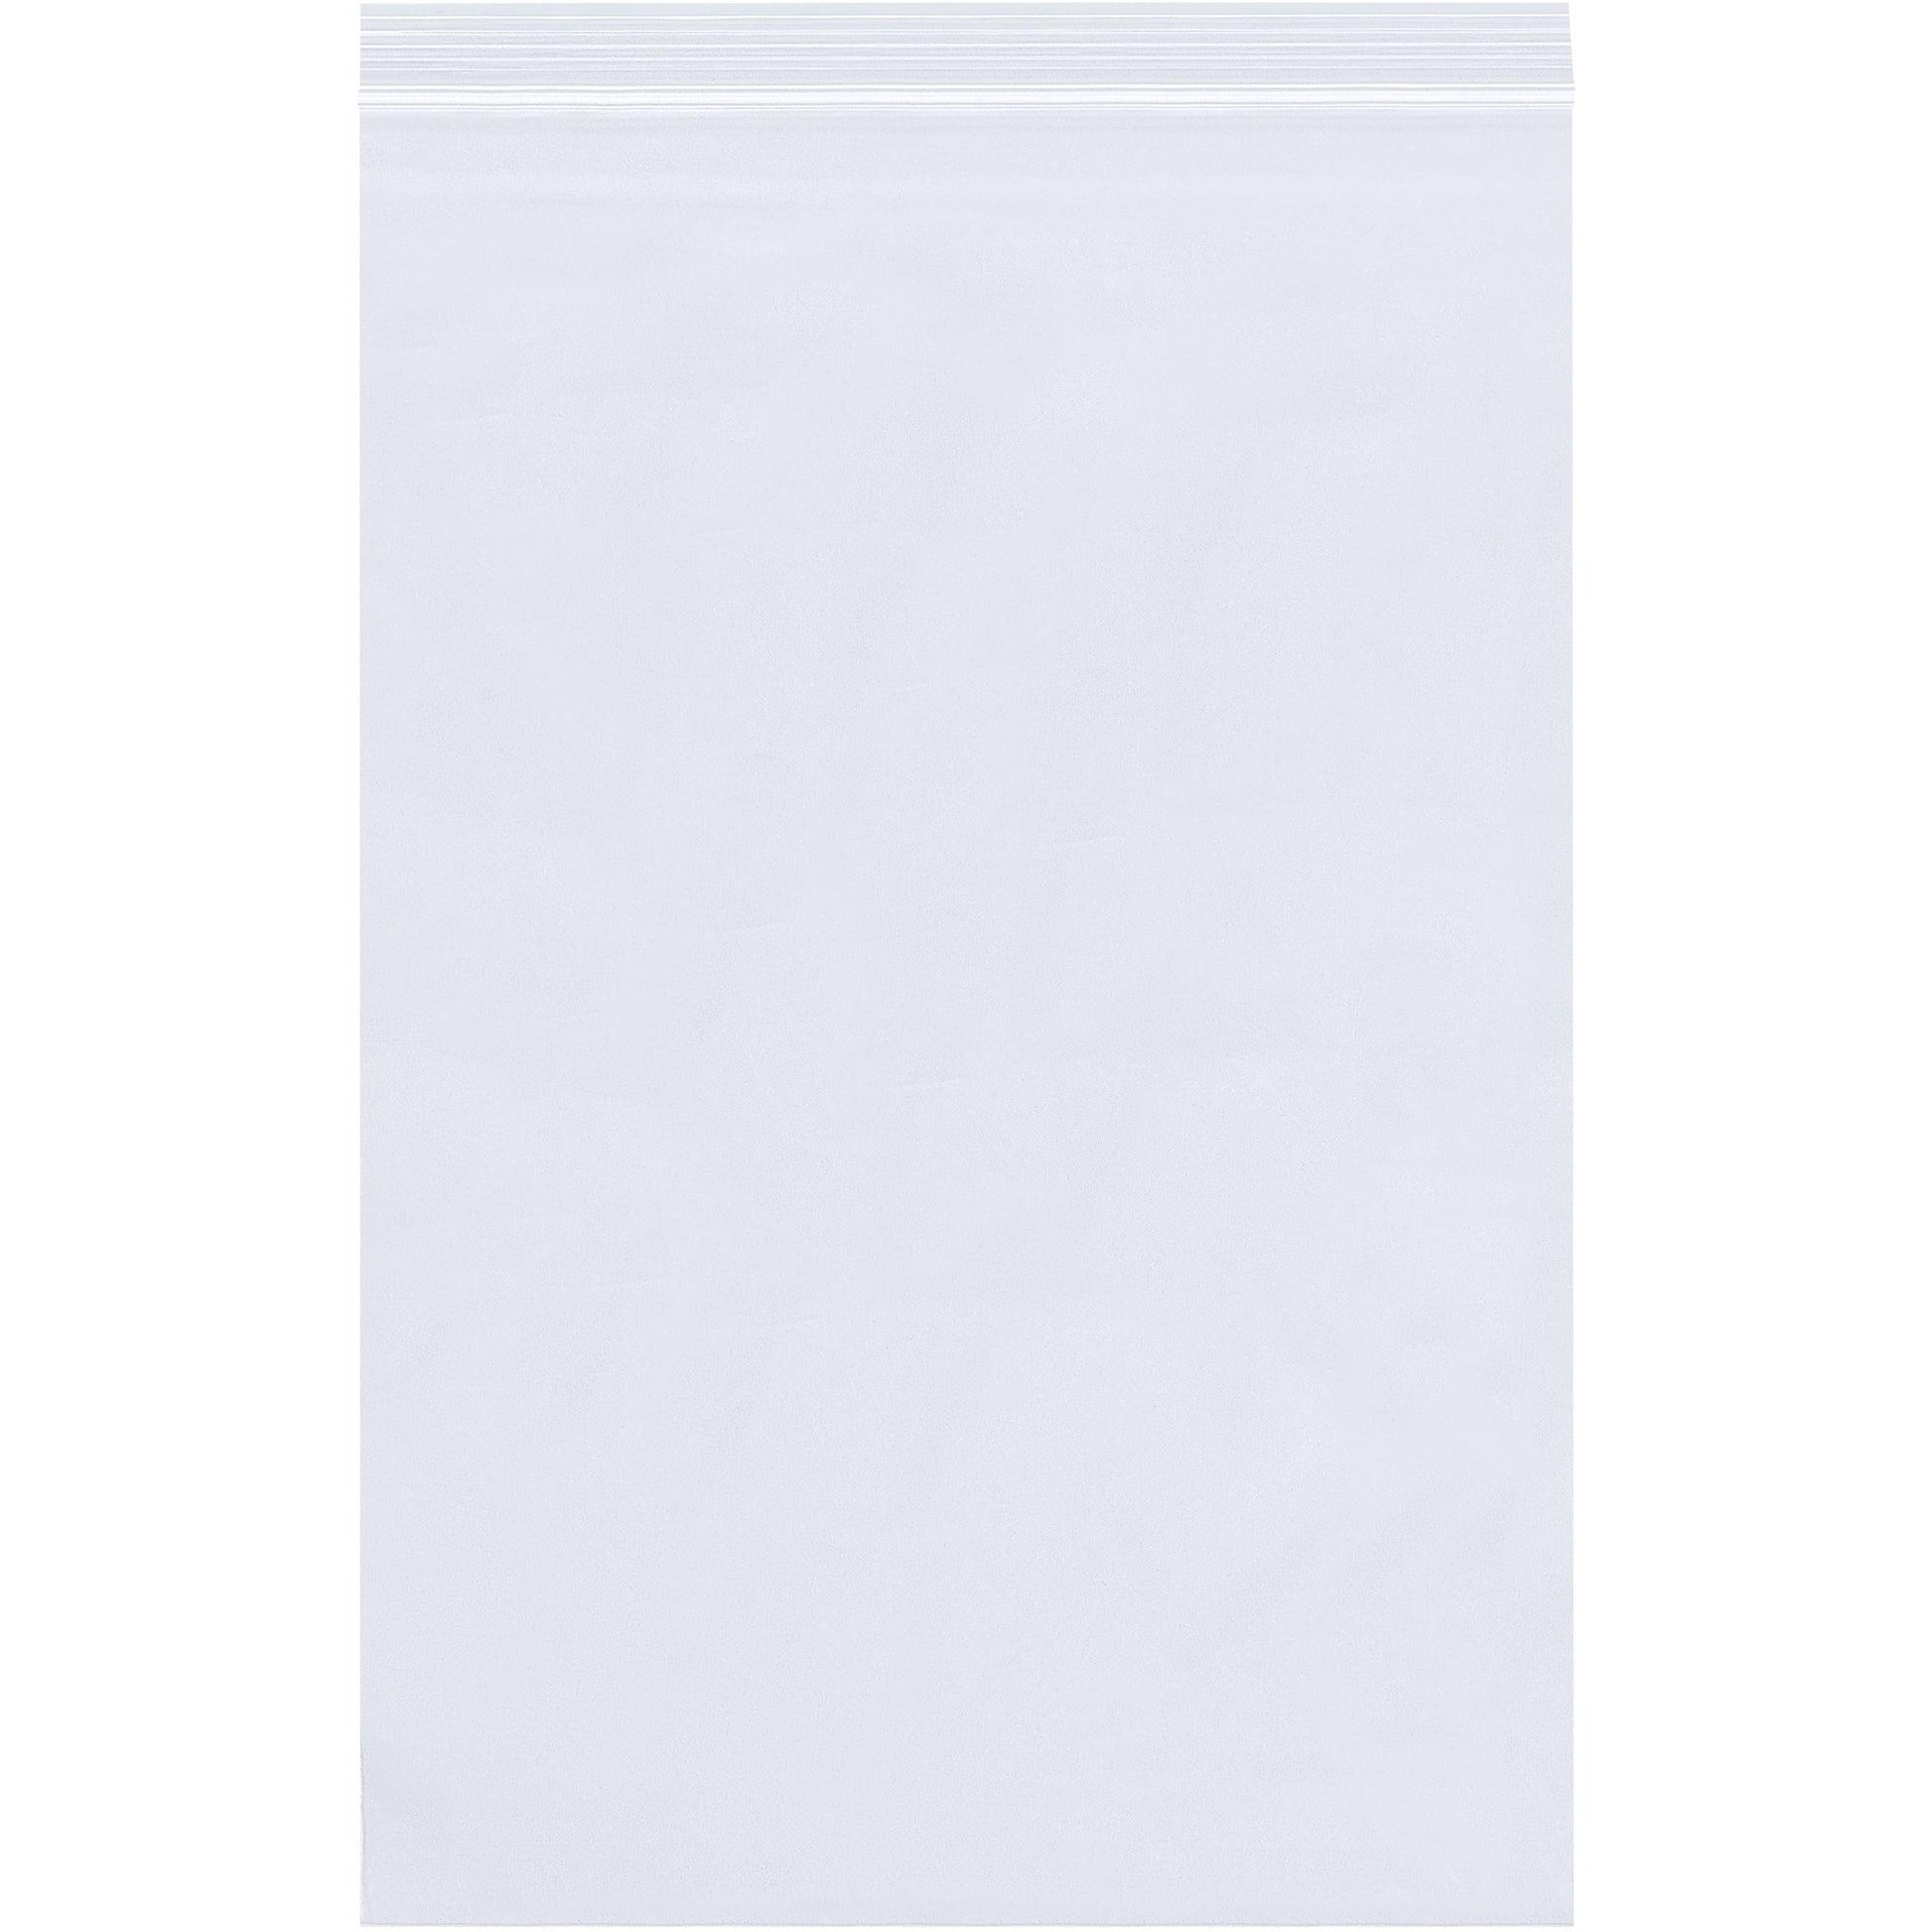 12 x 13" - 2 Mil Reclosable Poly Bags - PB3666